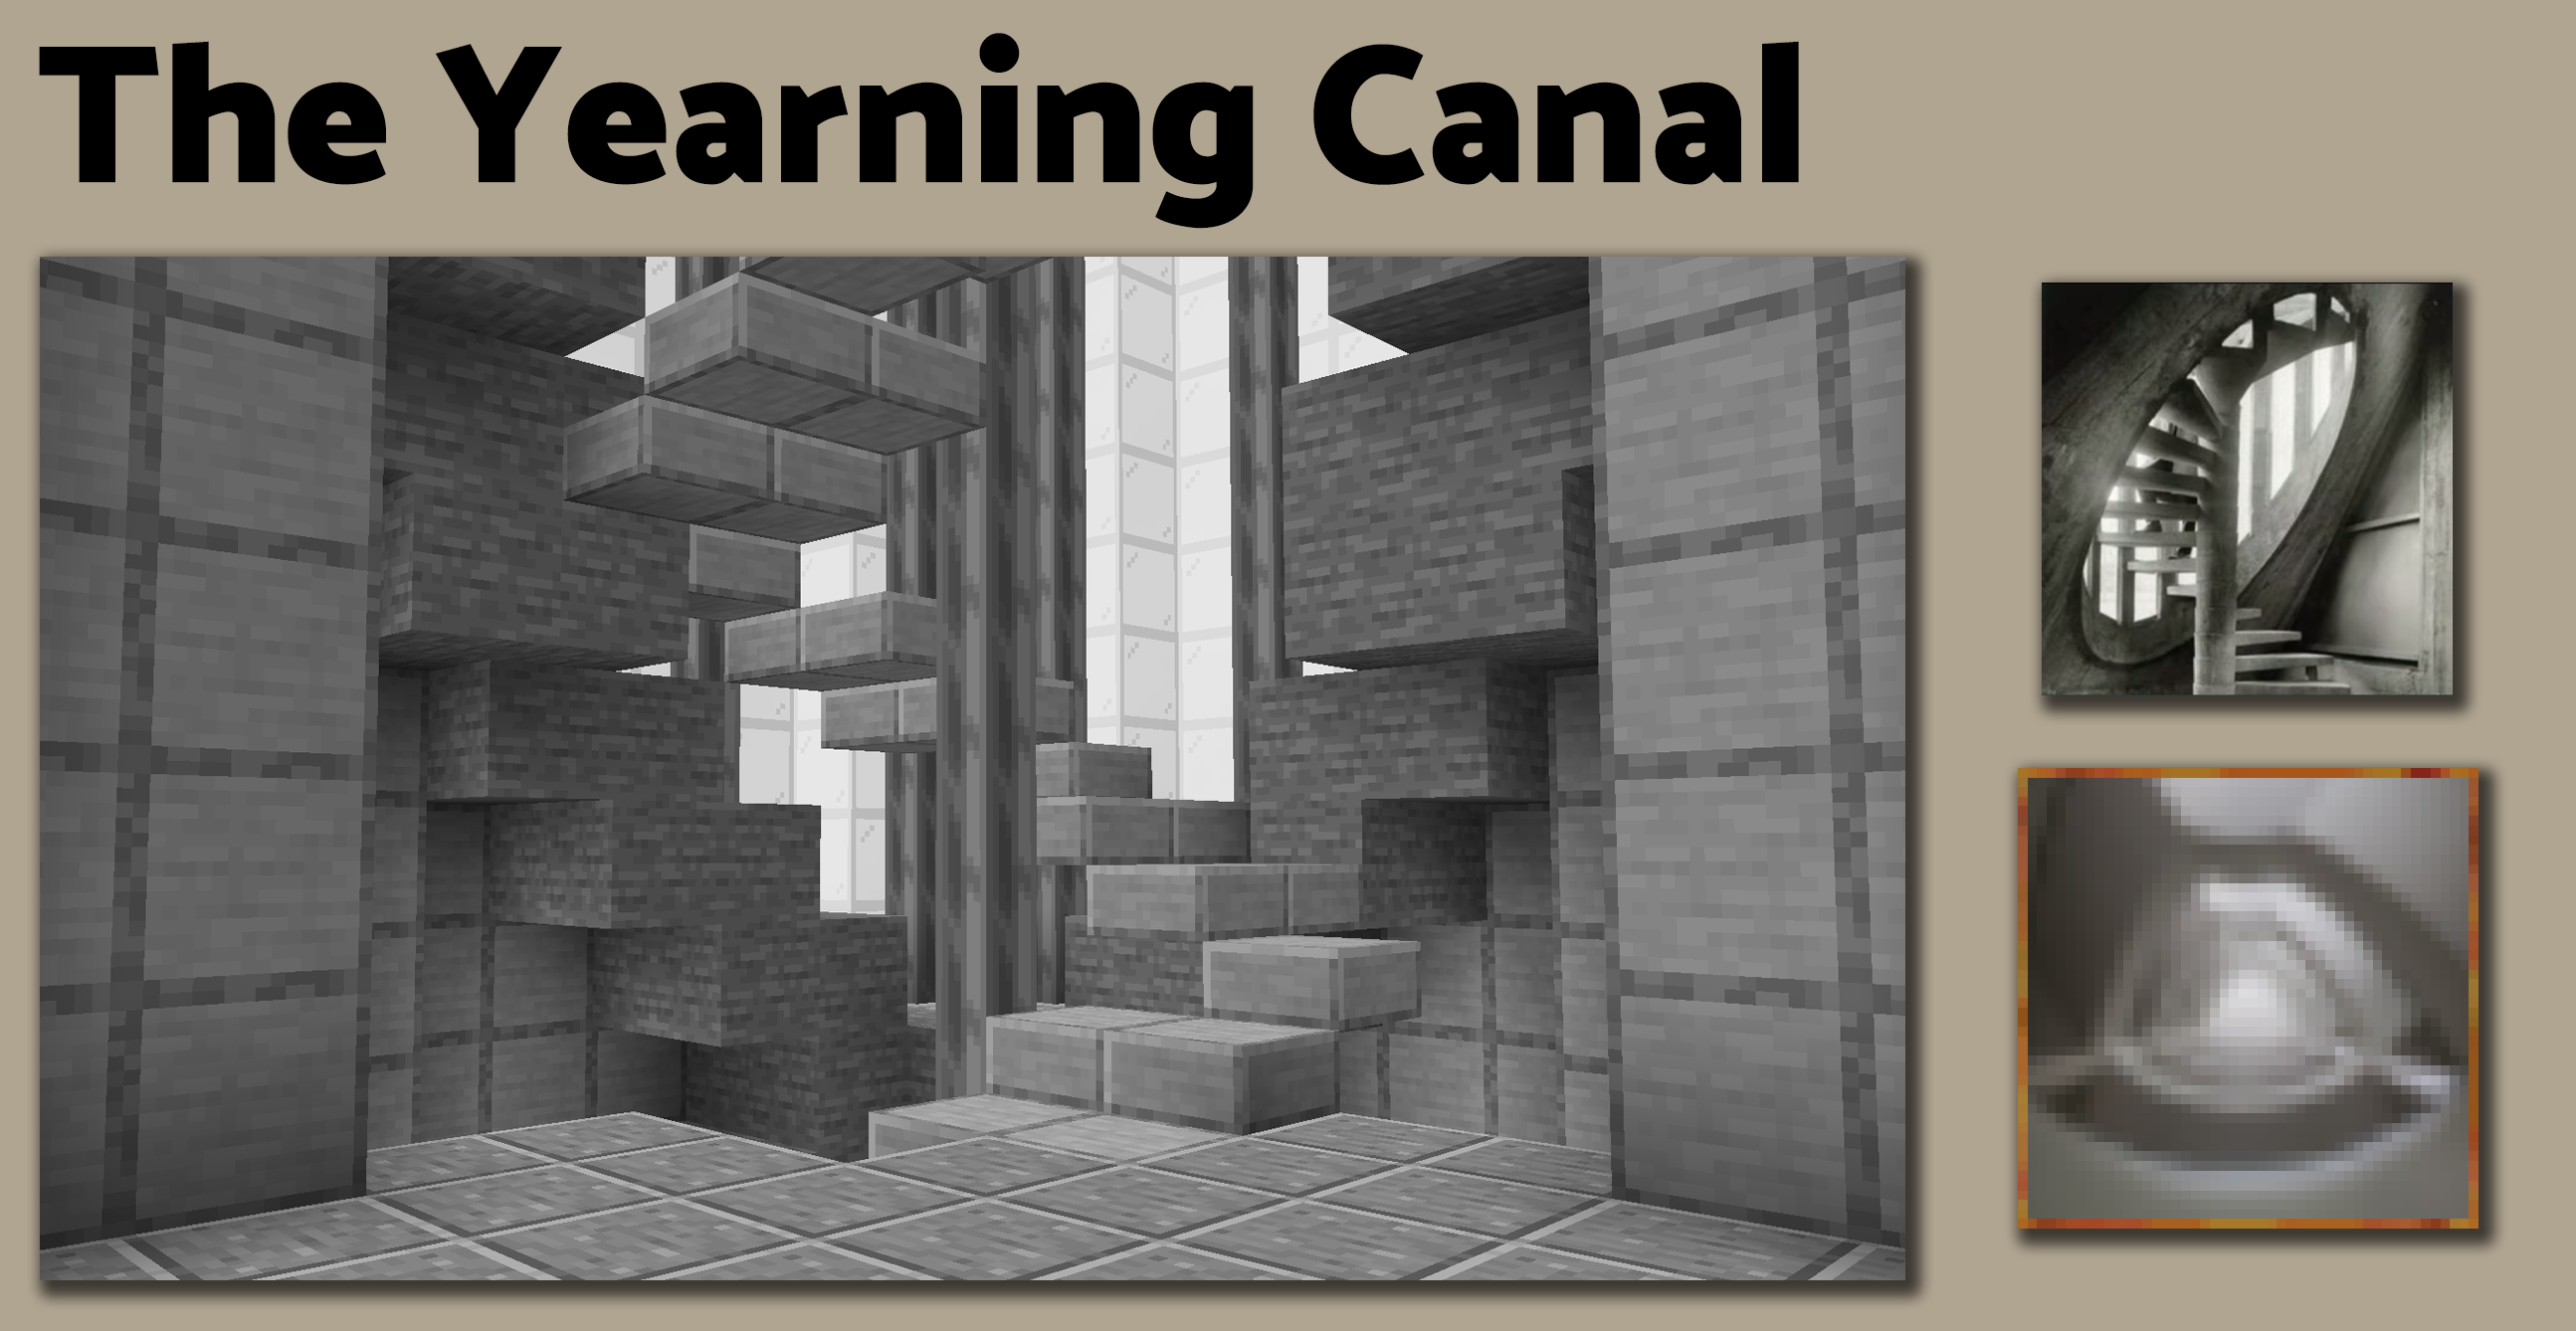 The Yearning Canal